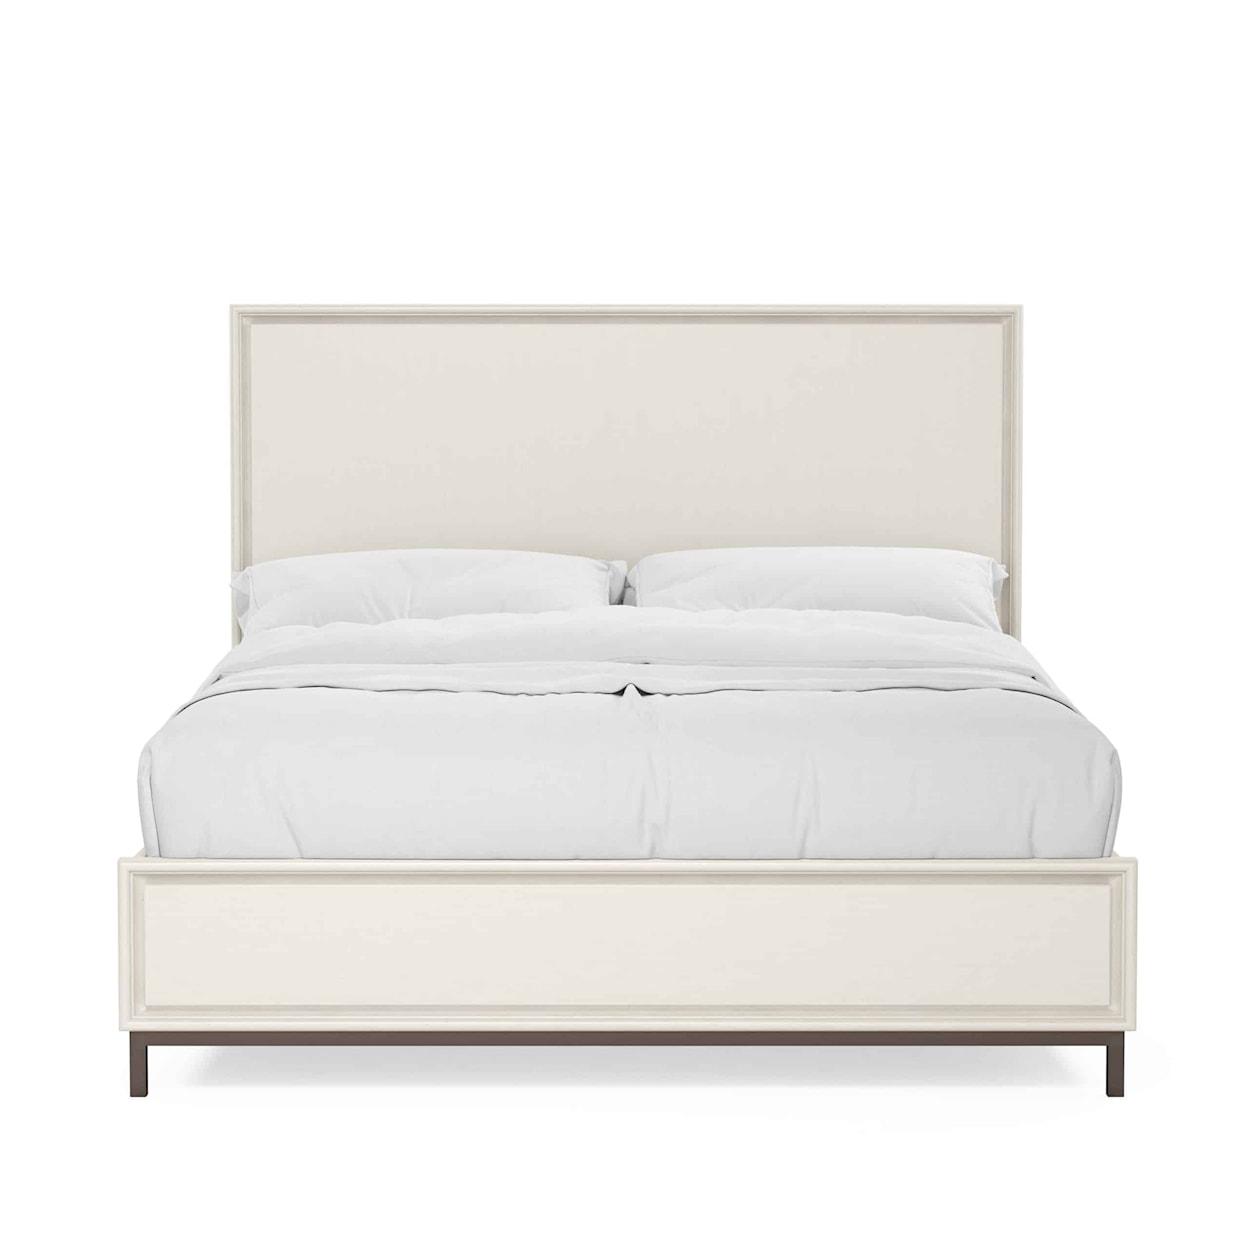 A.R.T. Furniture Inc Blanc Queen Panel Bed